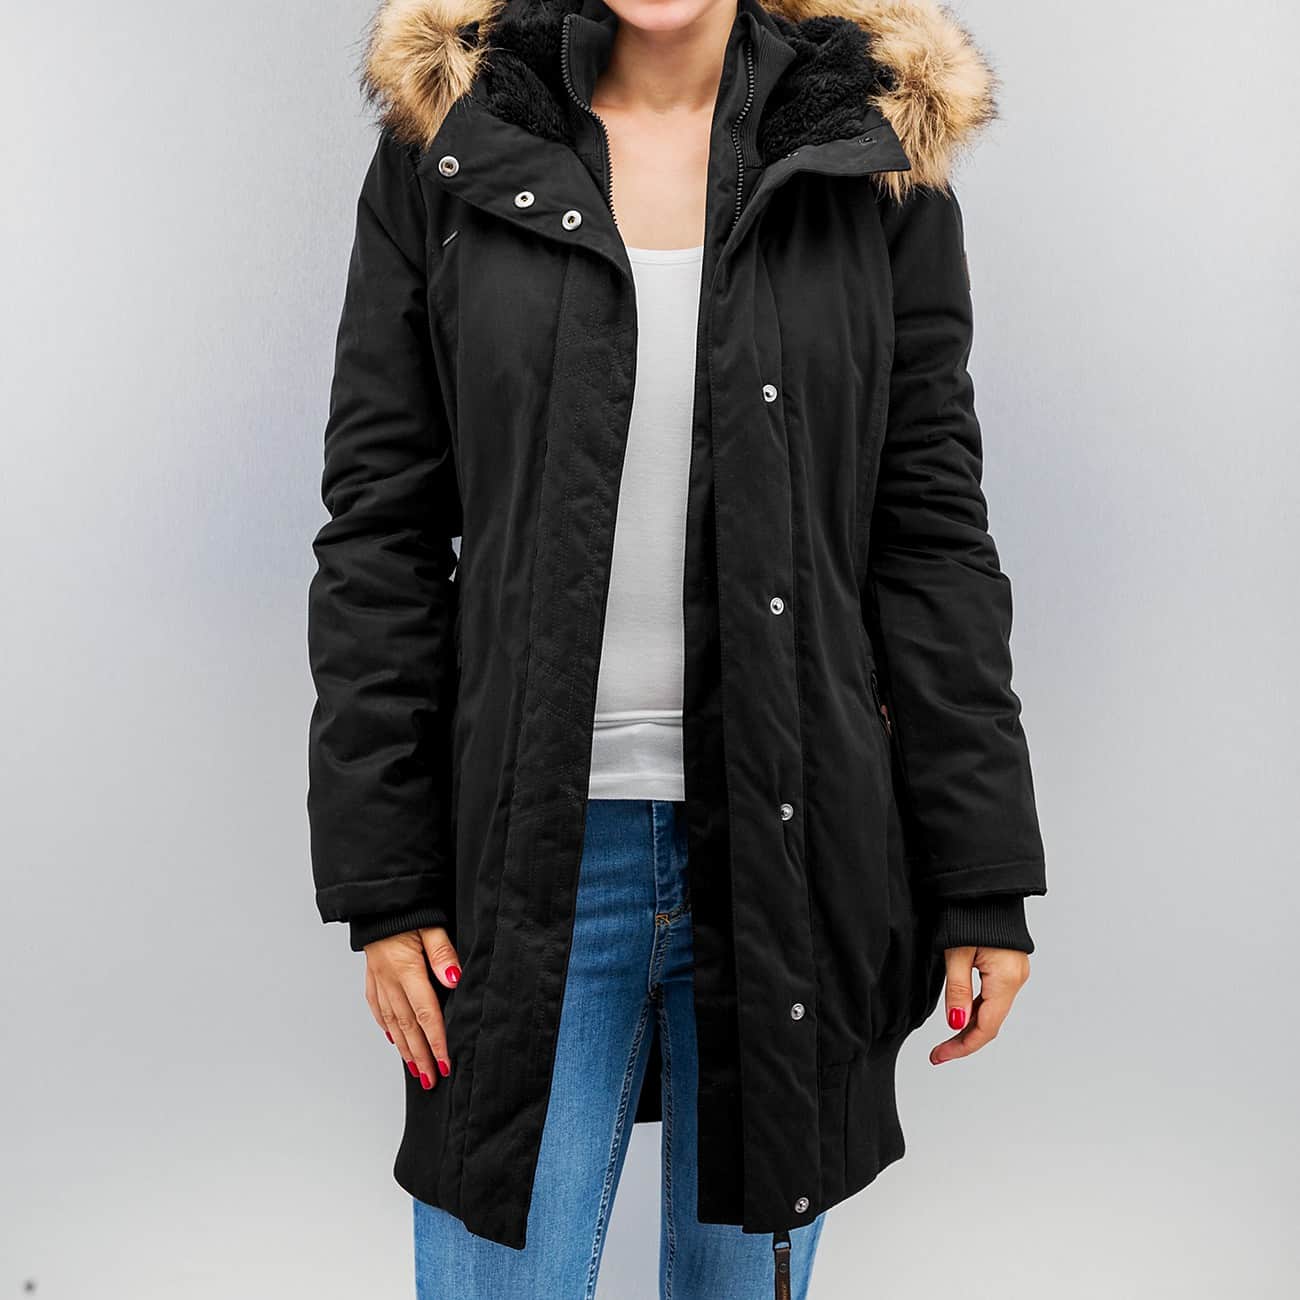 Ragwear Winter Jackets Cool designs with chic extras